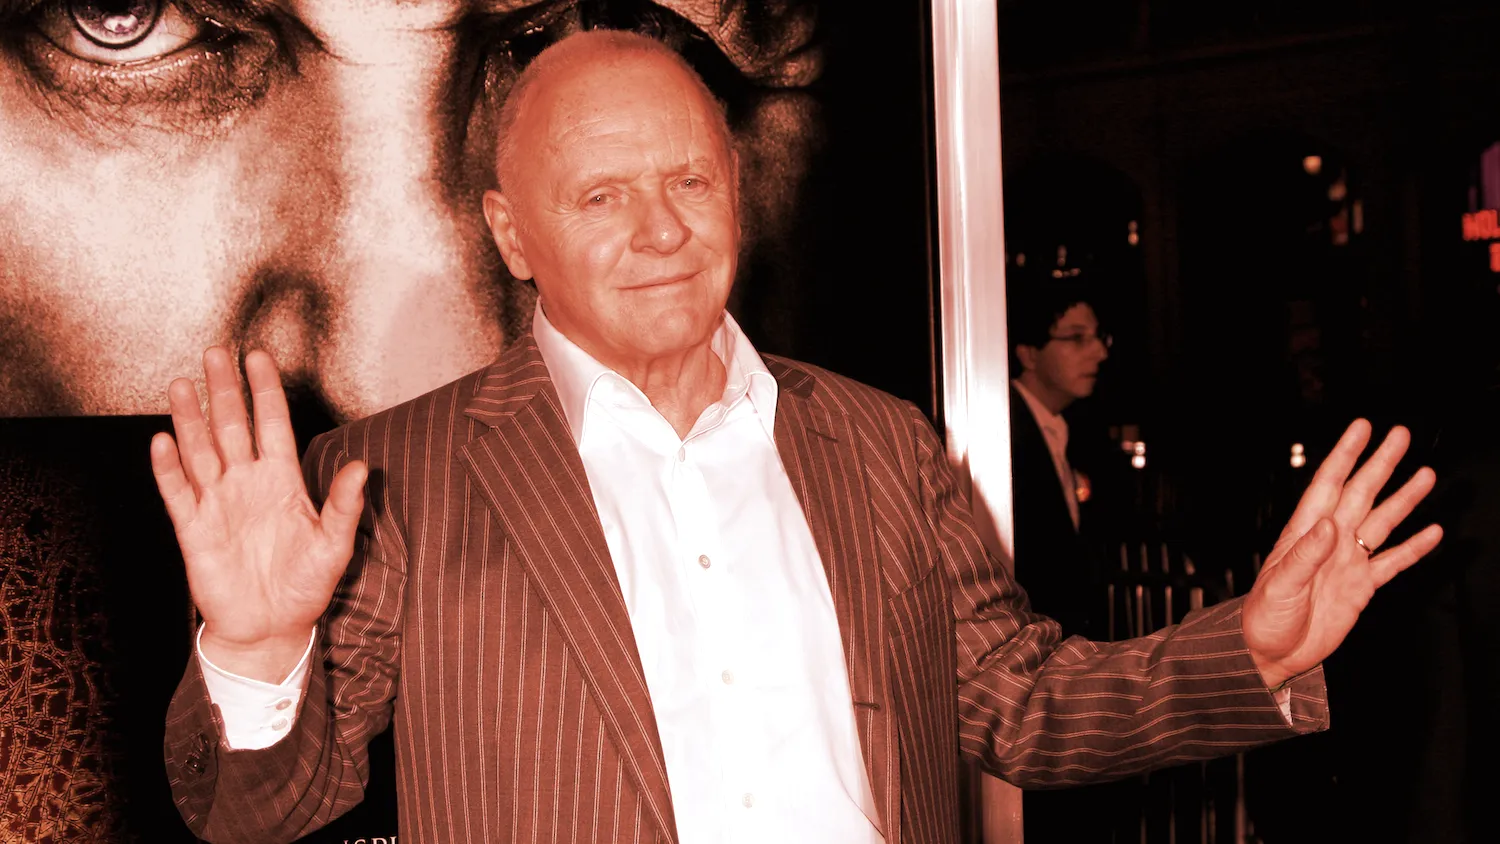 Actor Anthony Hopkins. Image: Shutterstock